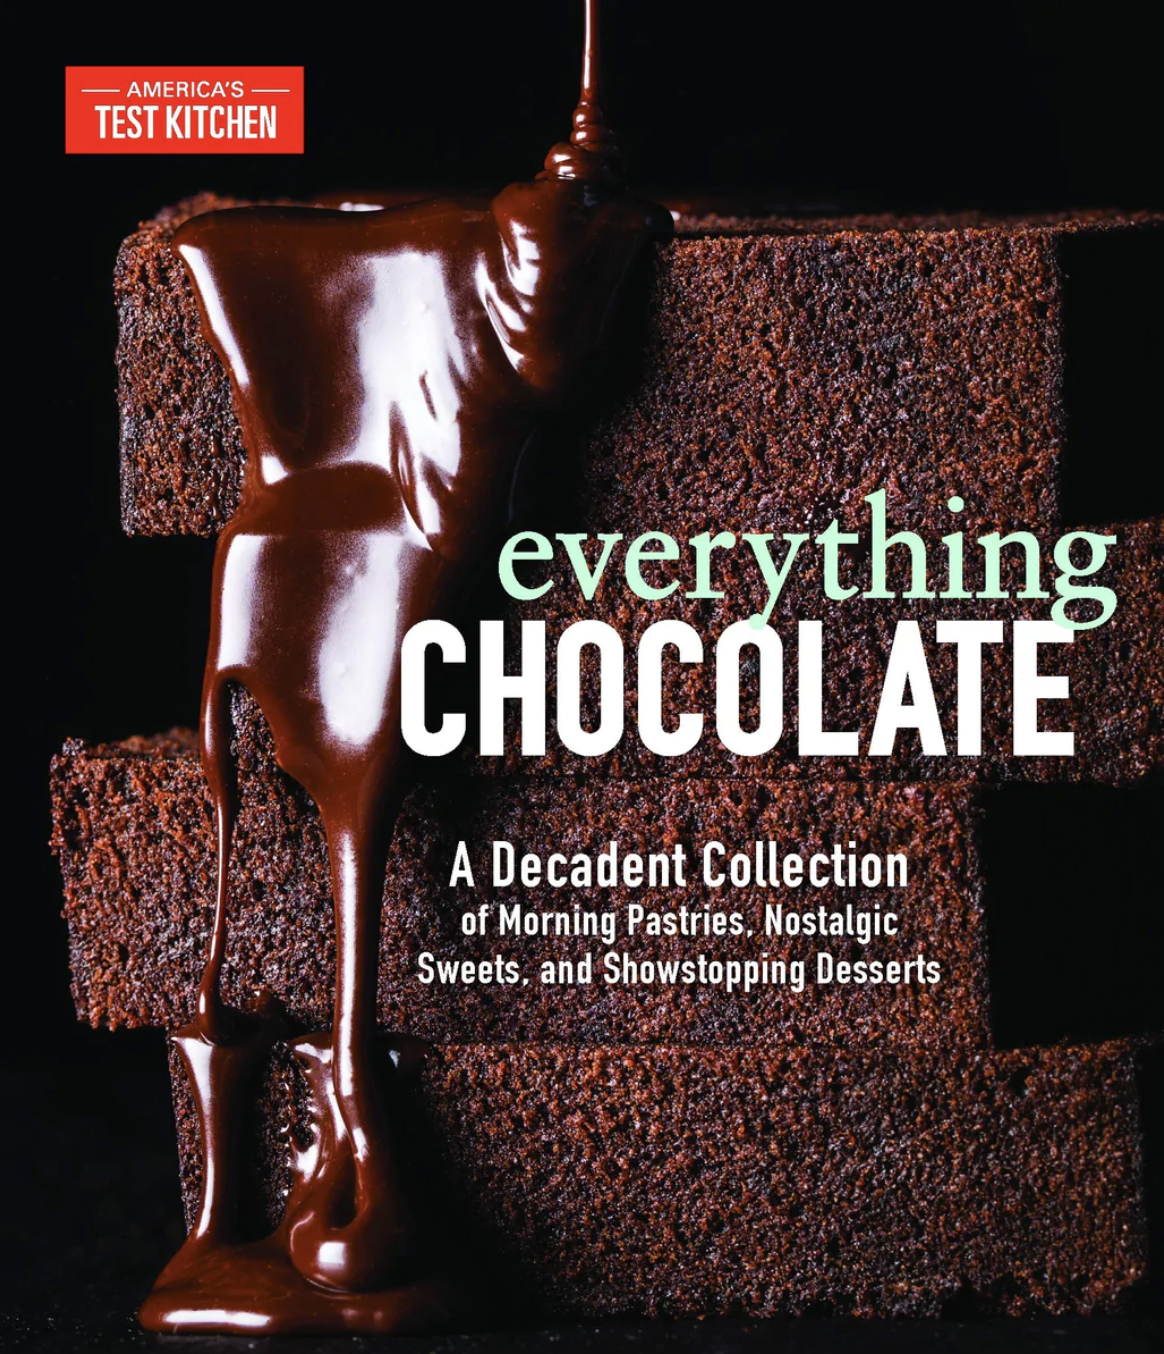 Everything Chocolate by America’s Test Kitchen cover featuring pieces of chocolate cake dripping with chocolate sauce.